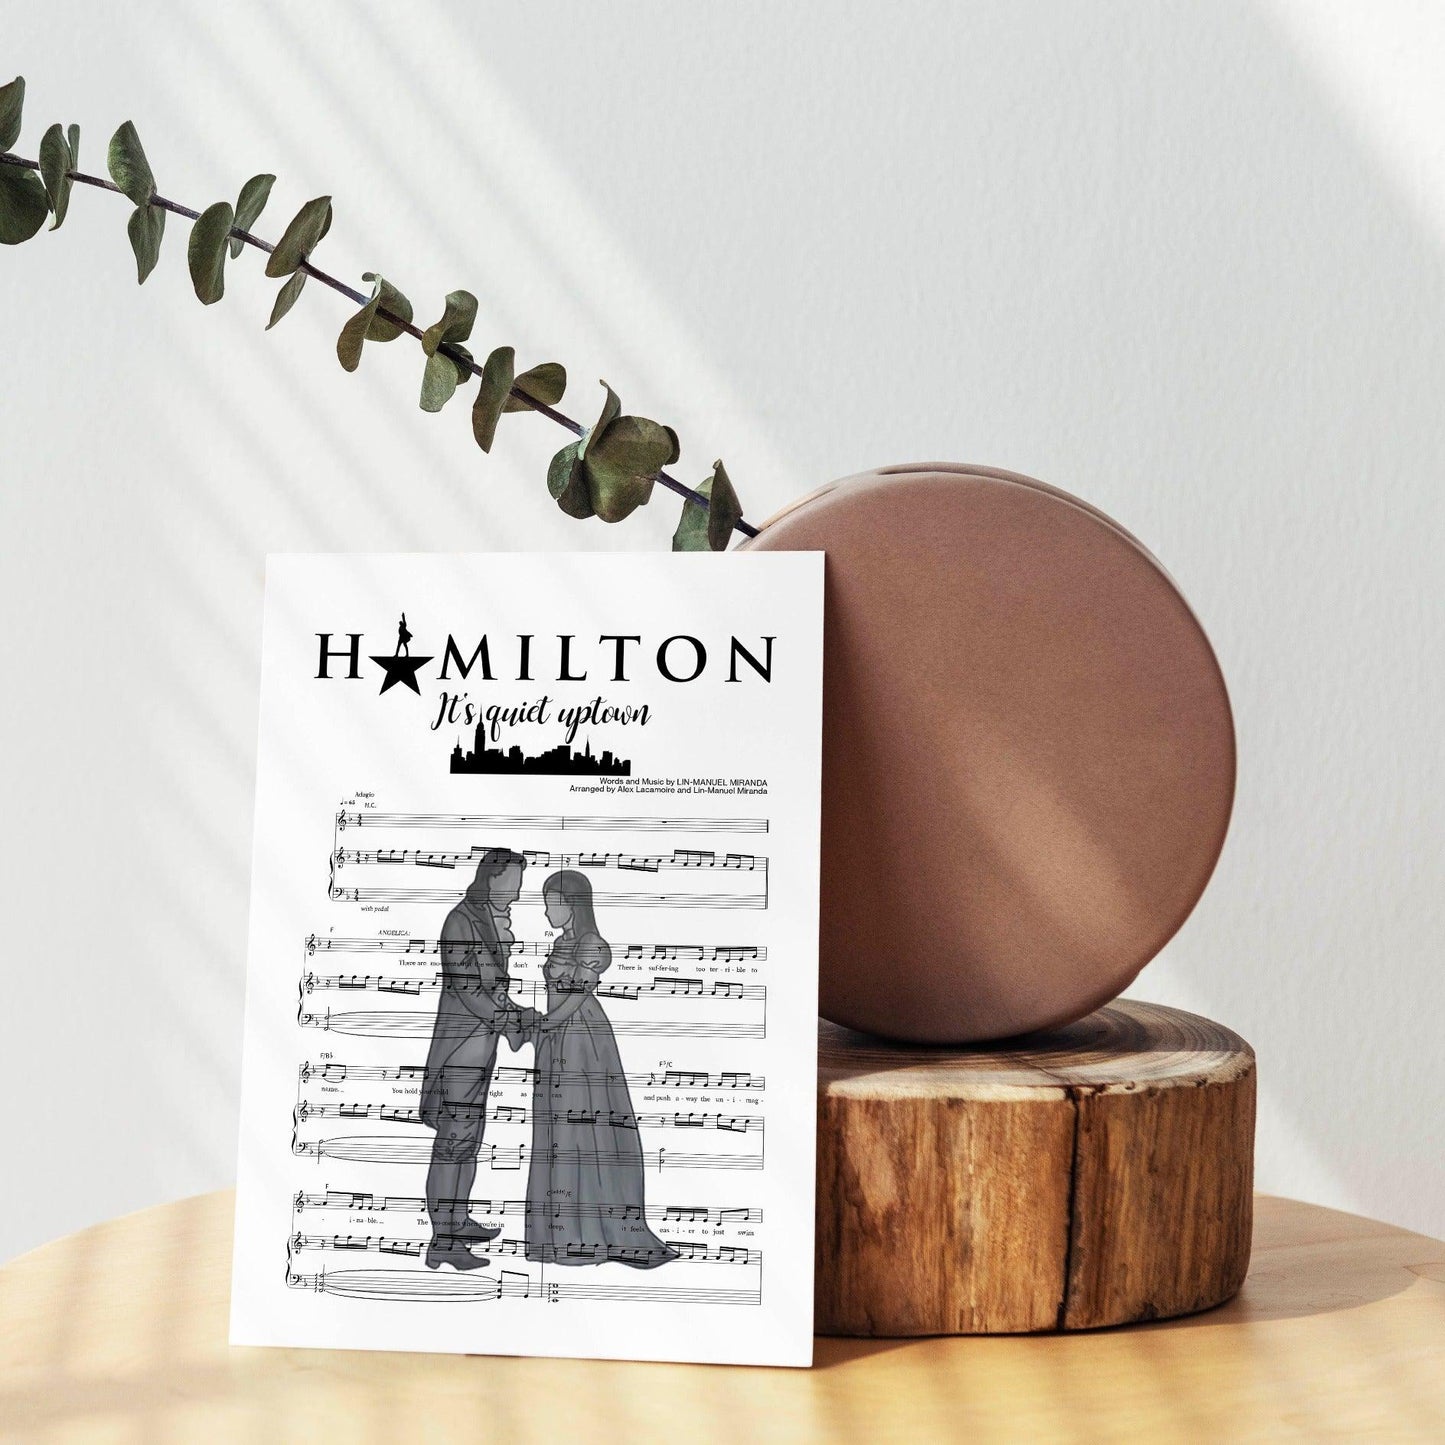 Make your walls " Hamilton - IT’S QUIET UPTOWN " with this unique poster. Relive the magic of the musical Hamilton with this beautiful poster. Measuring 18"x24", it makes a perfect addition to any wall. Printed on high quality paper, this poster is perfect for framing and makes a great gift for any Hamilton fan.